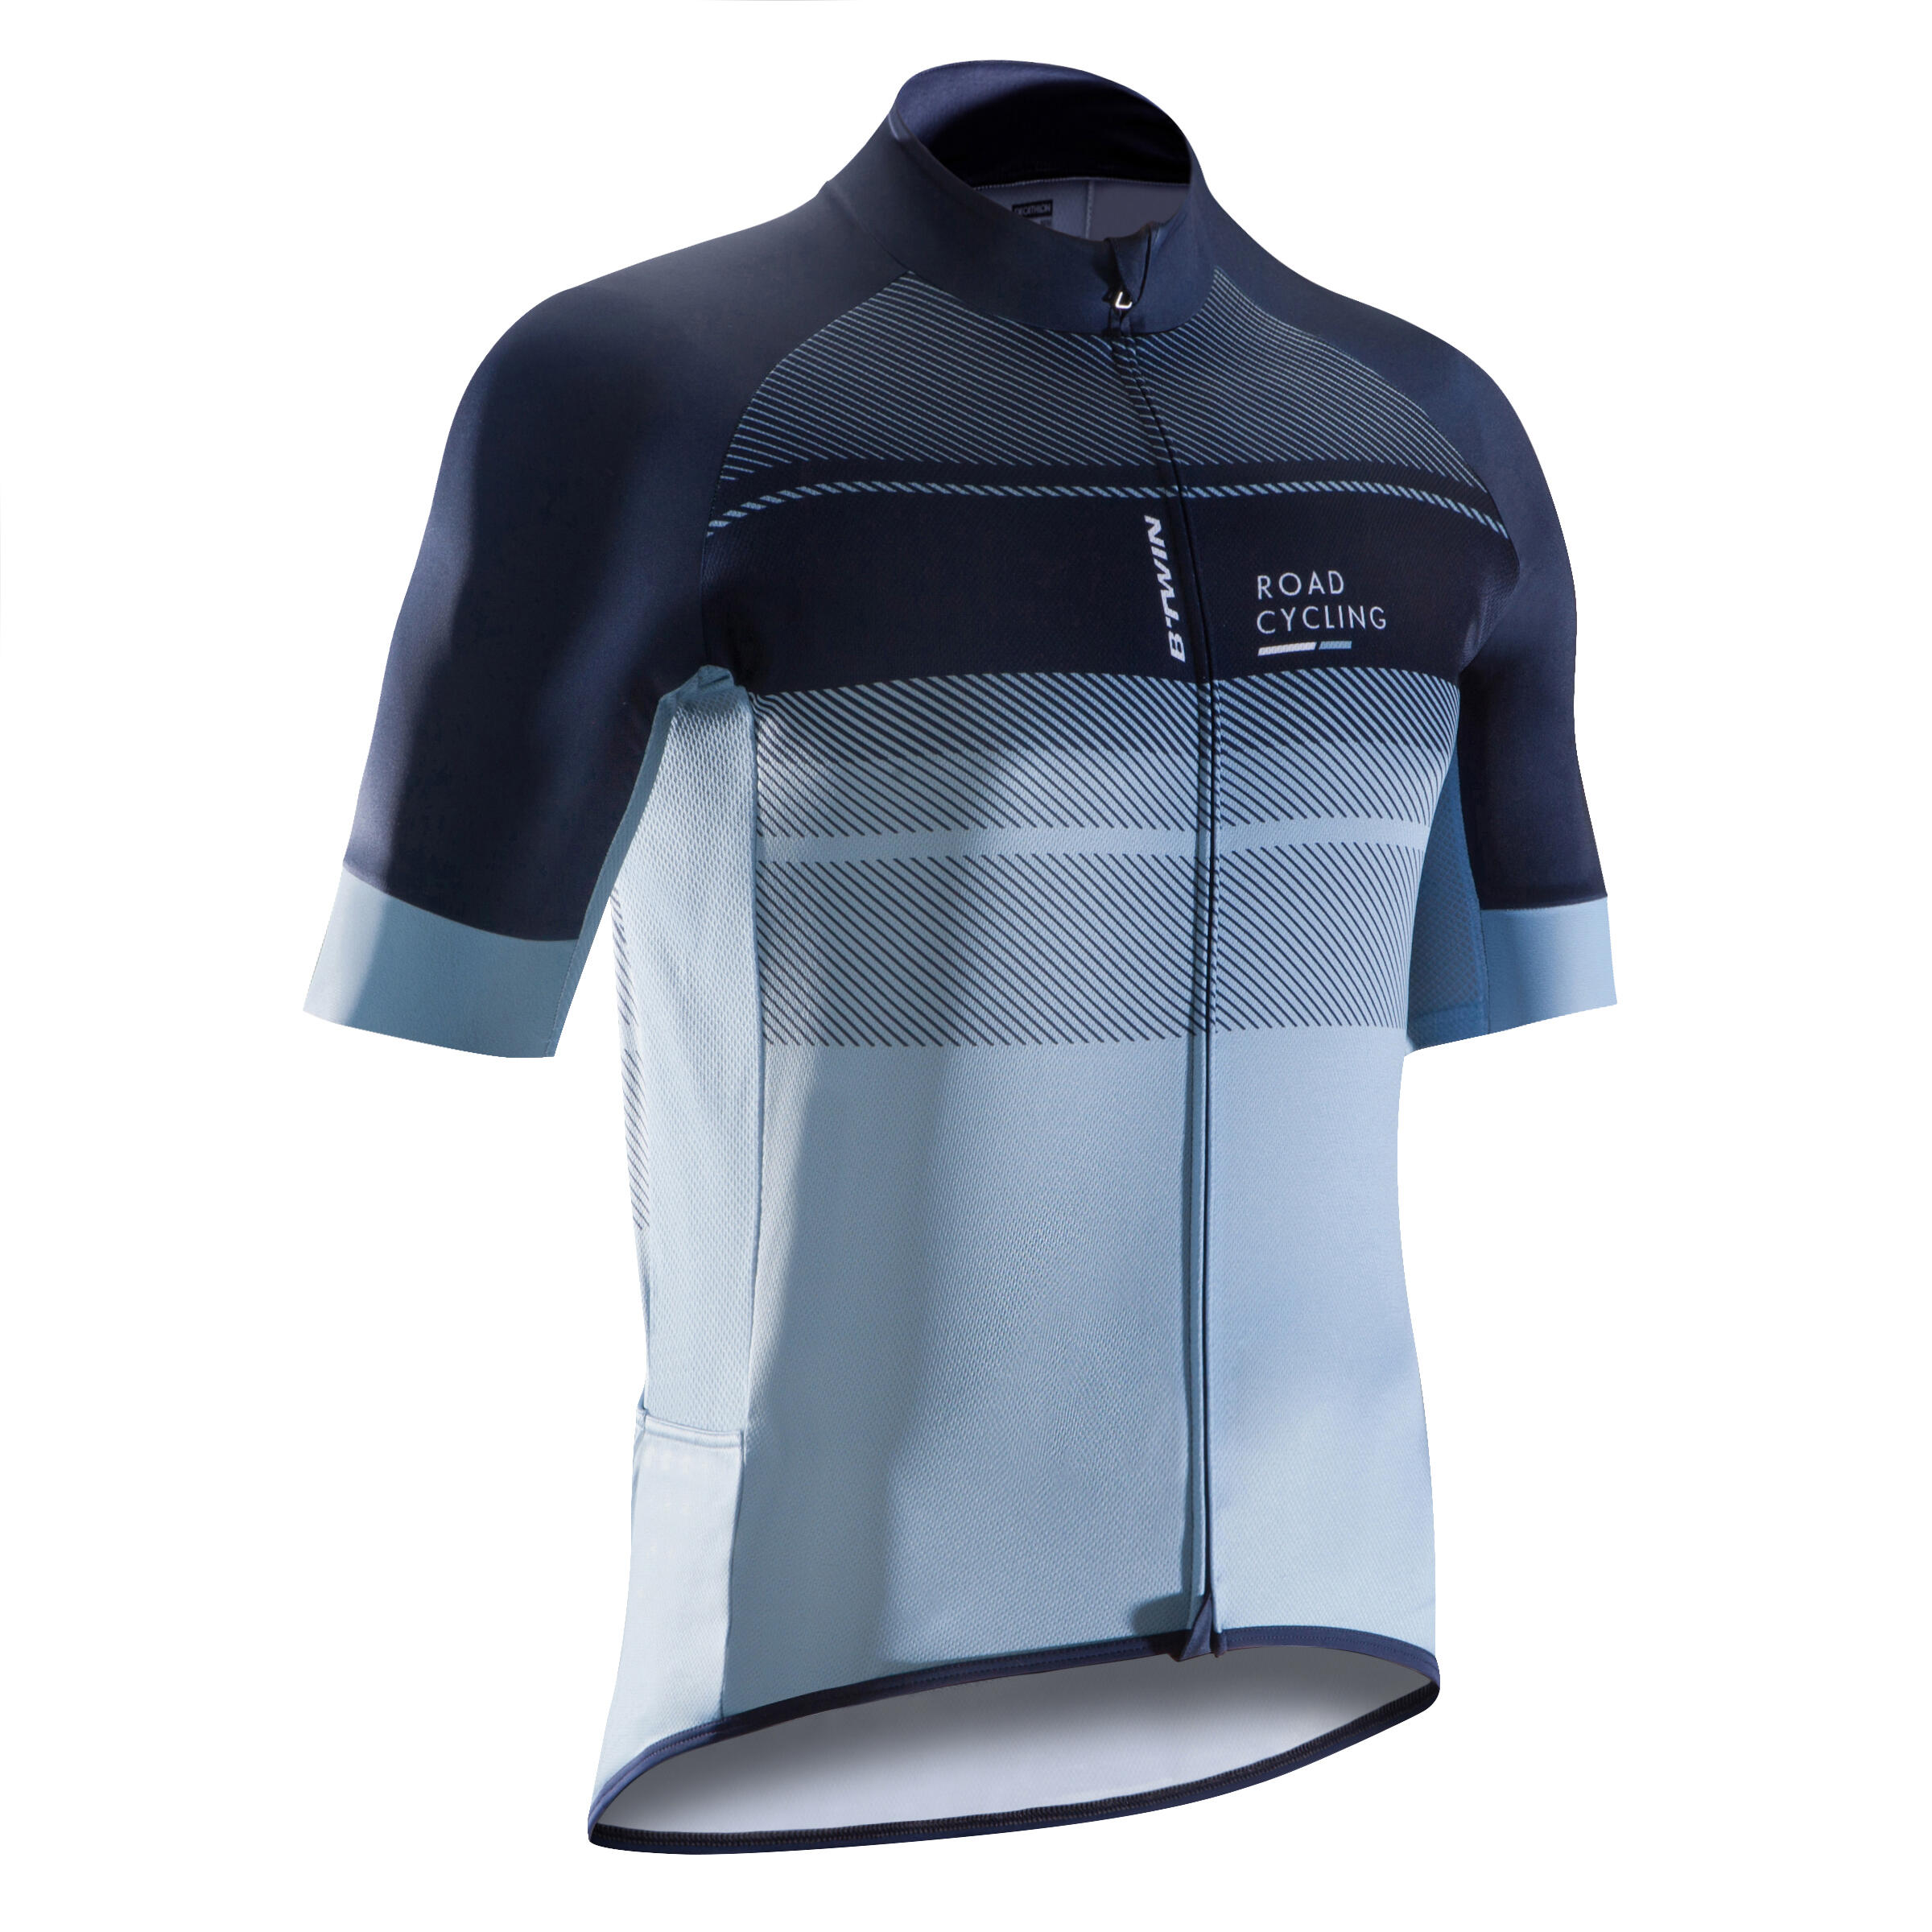 RoadCycling 900 Short-Sleeved Cycling 